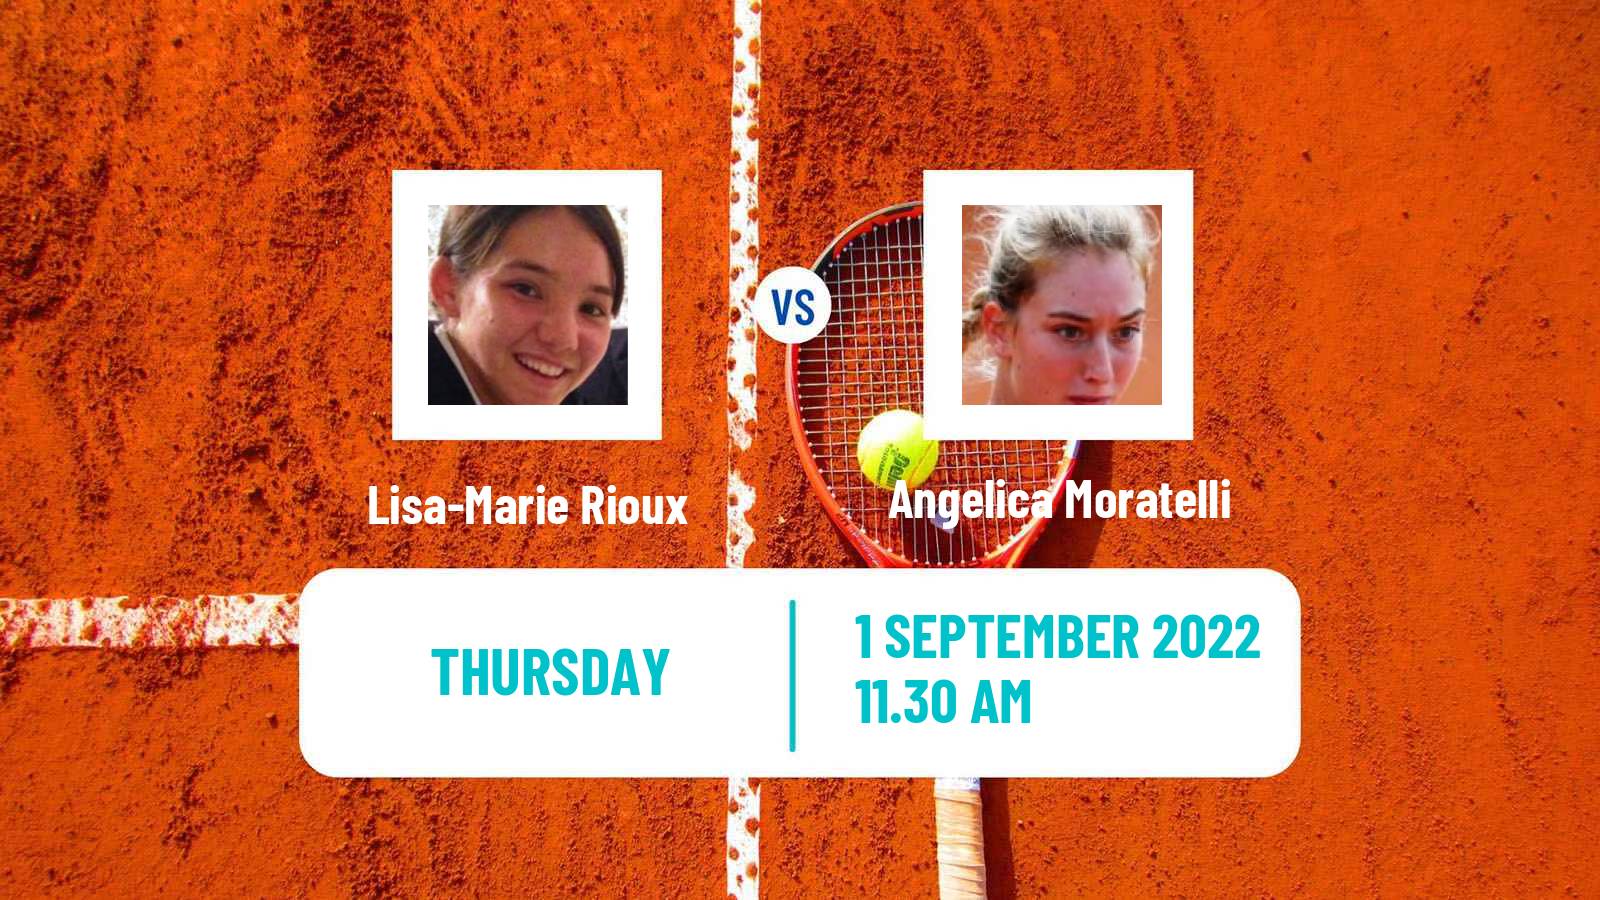 Tennis ITF Tournaments Lisa-Marie Rioux - Angelica Moratelli